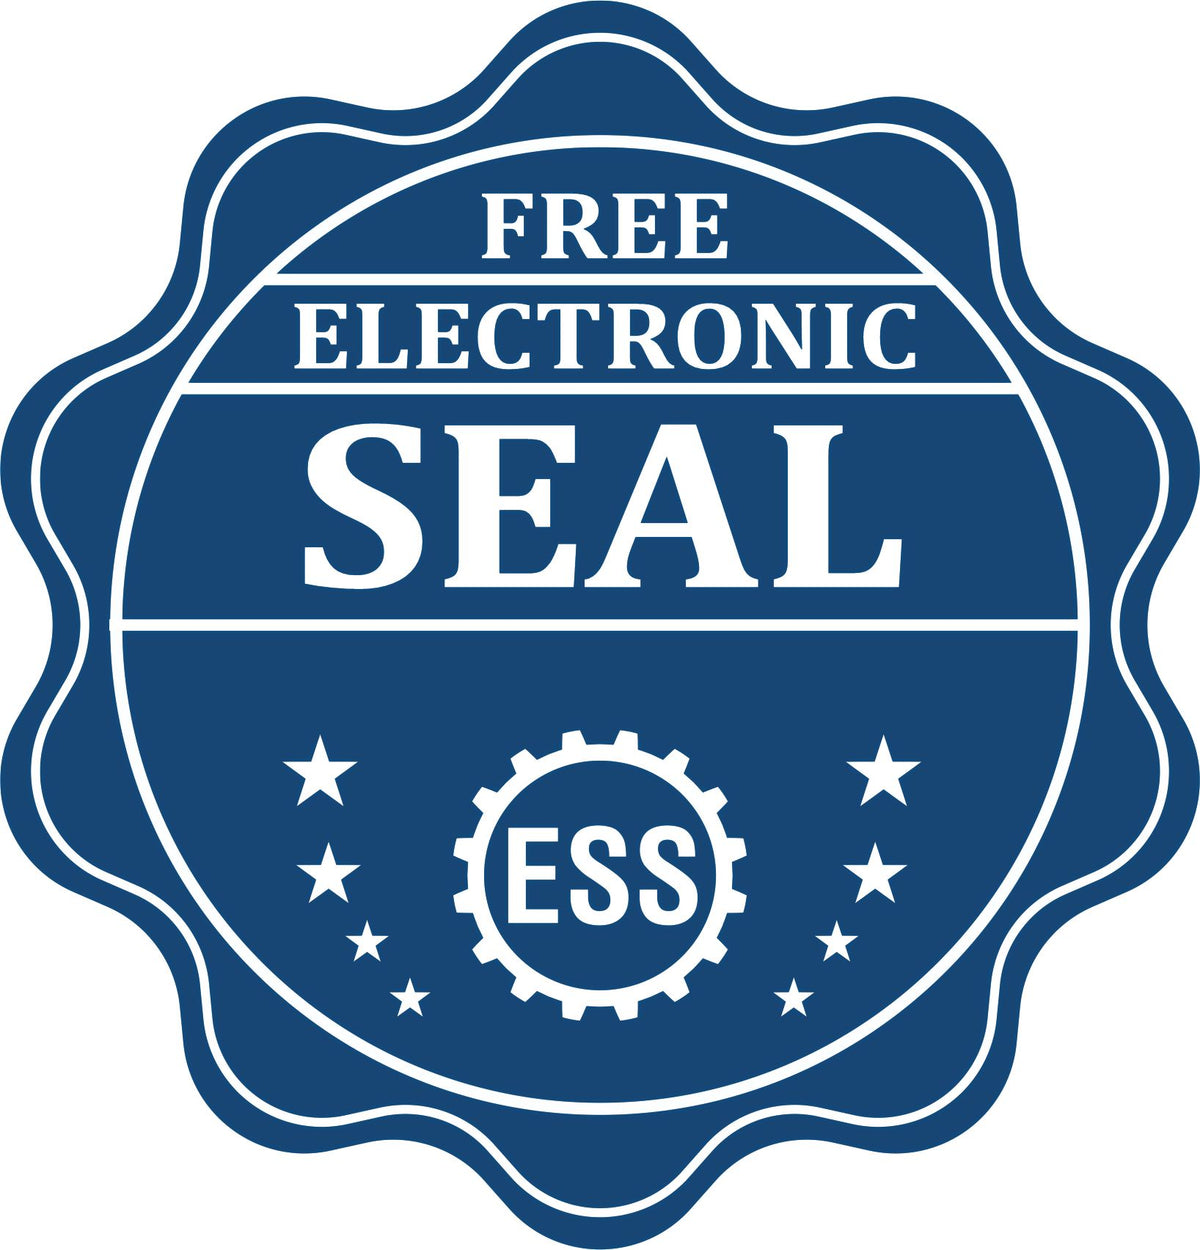 A badge showing a free electronic seal for the Hybrid Arkansas Landscape Architect Seal with stars and the ESS gear on the emblem.